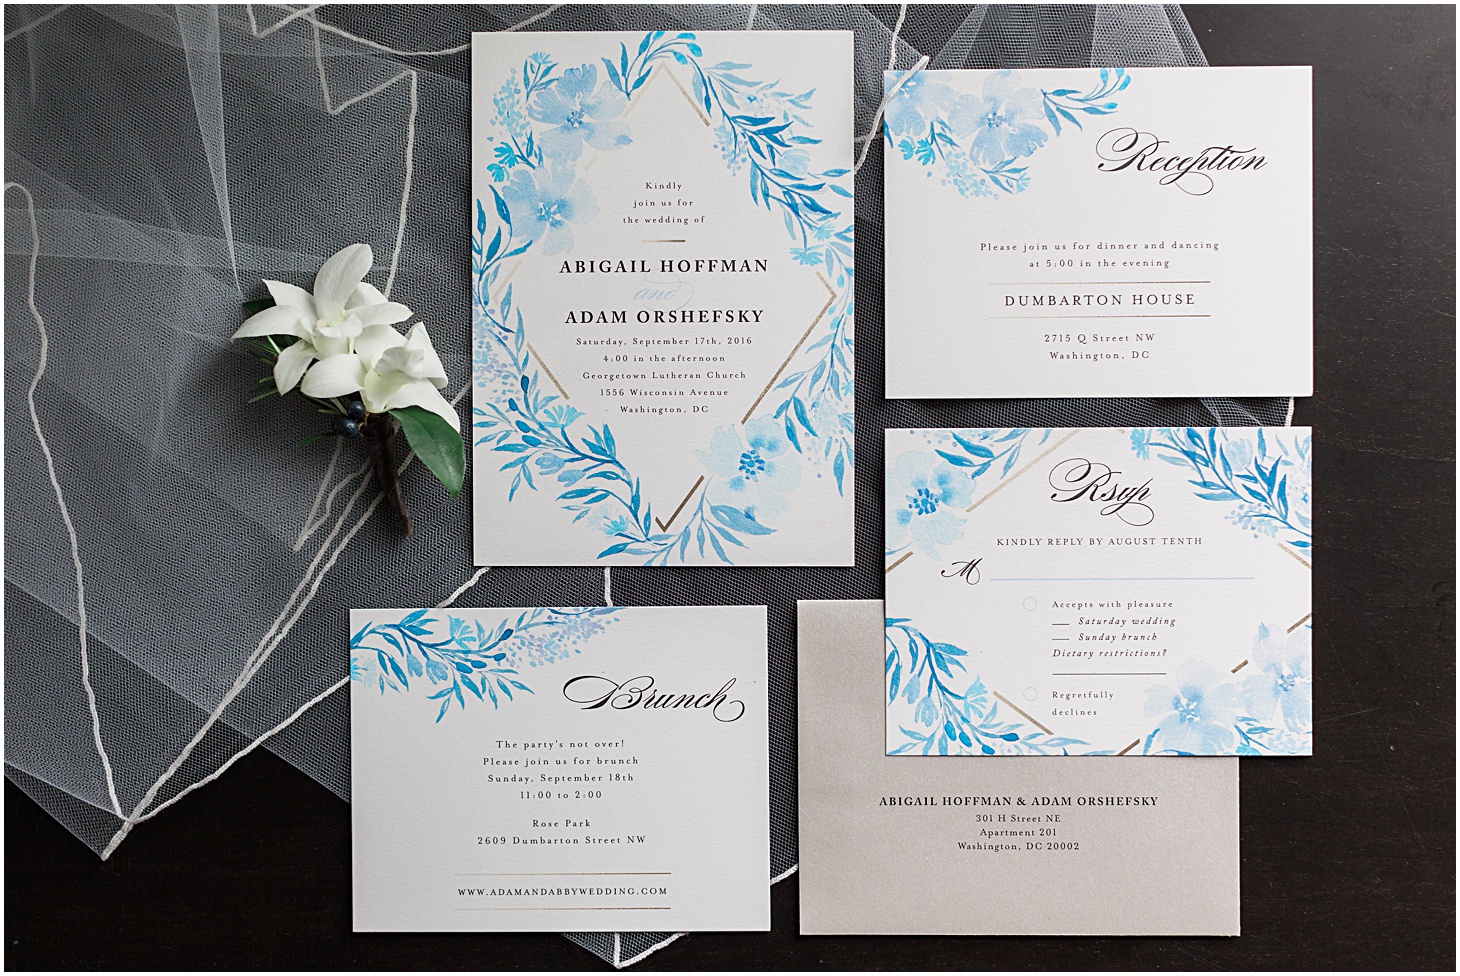 Minted Invitations | Vintage-Inspired Dumbarton House Wedding in Georgetown by Sarah Bradshaw Photography